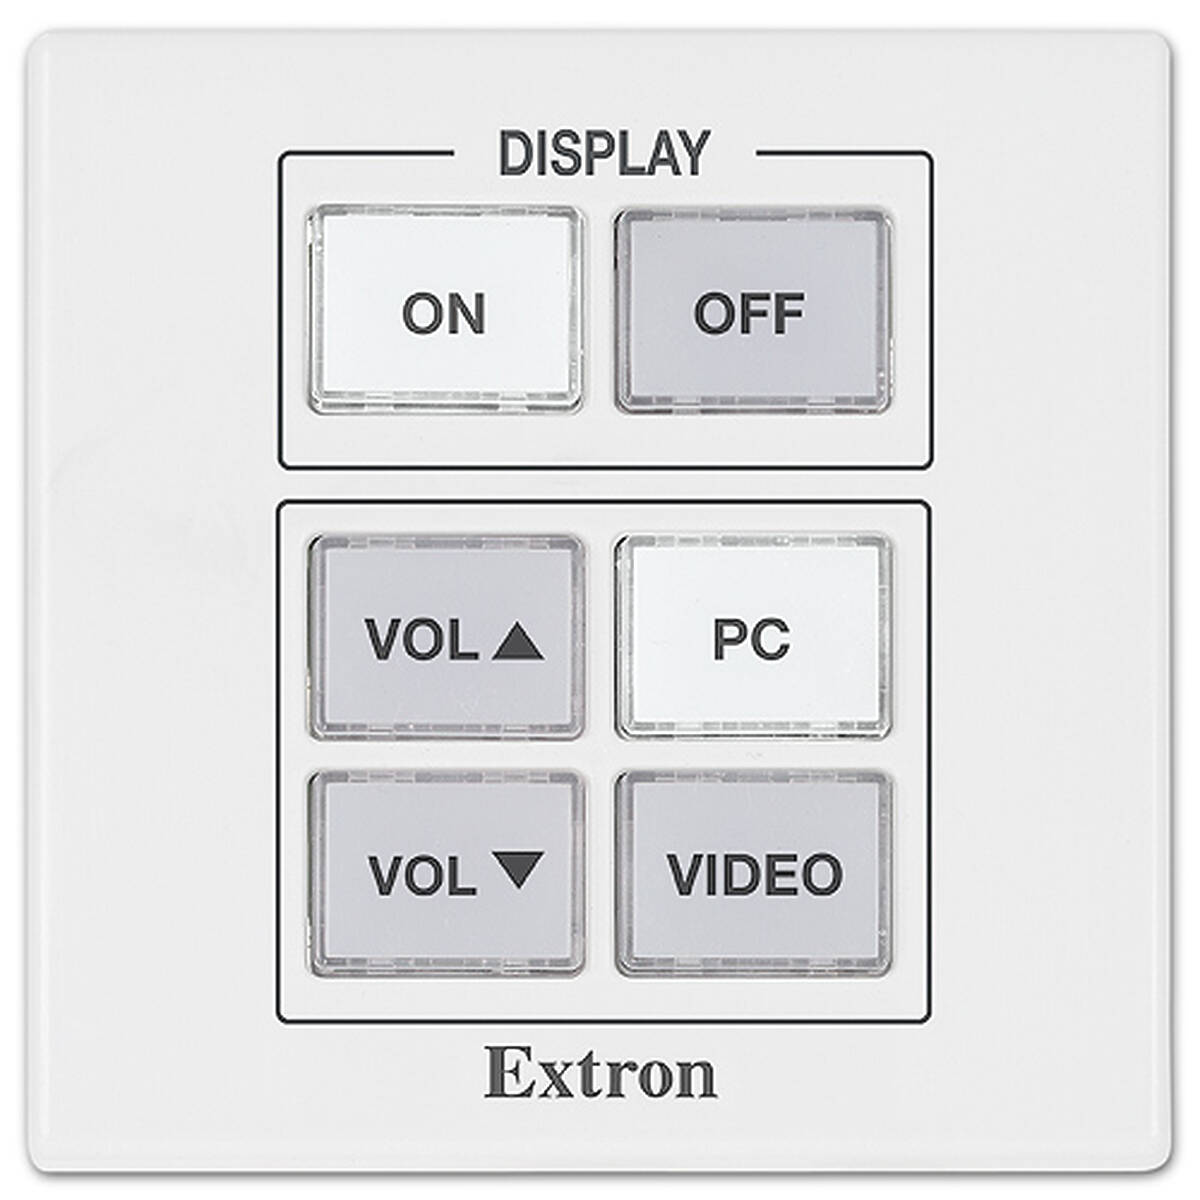 Extron MLC 55 RS MK 60-1390-23  product image